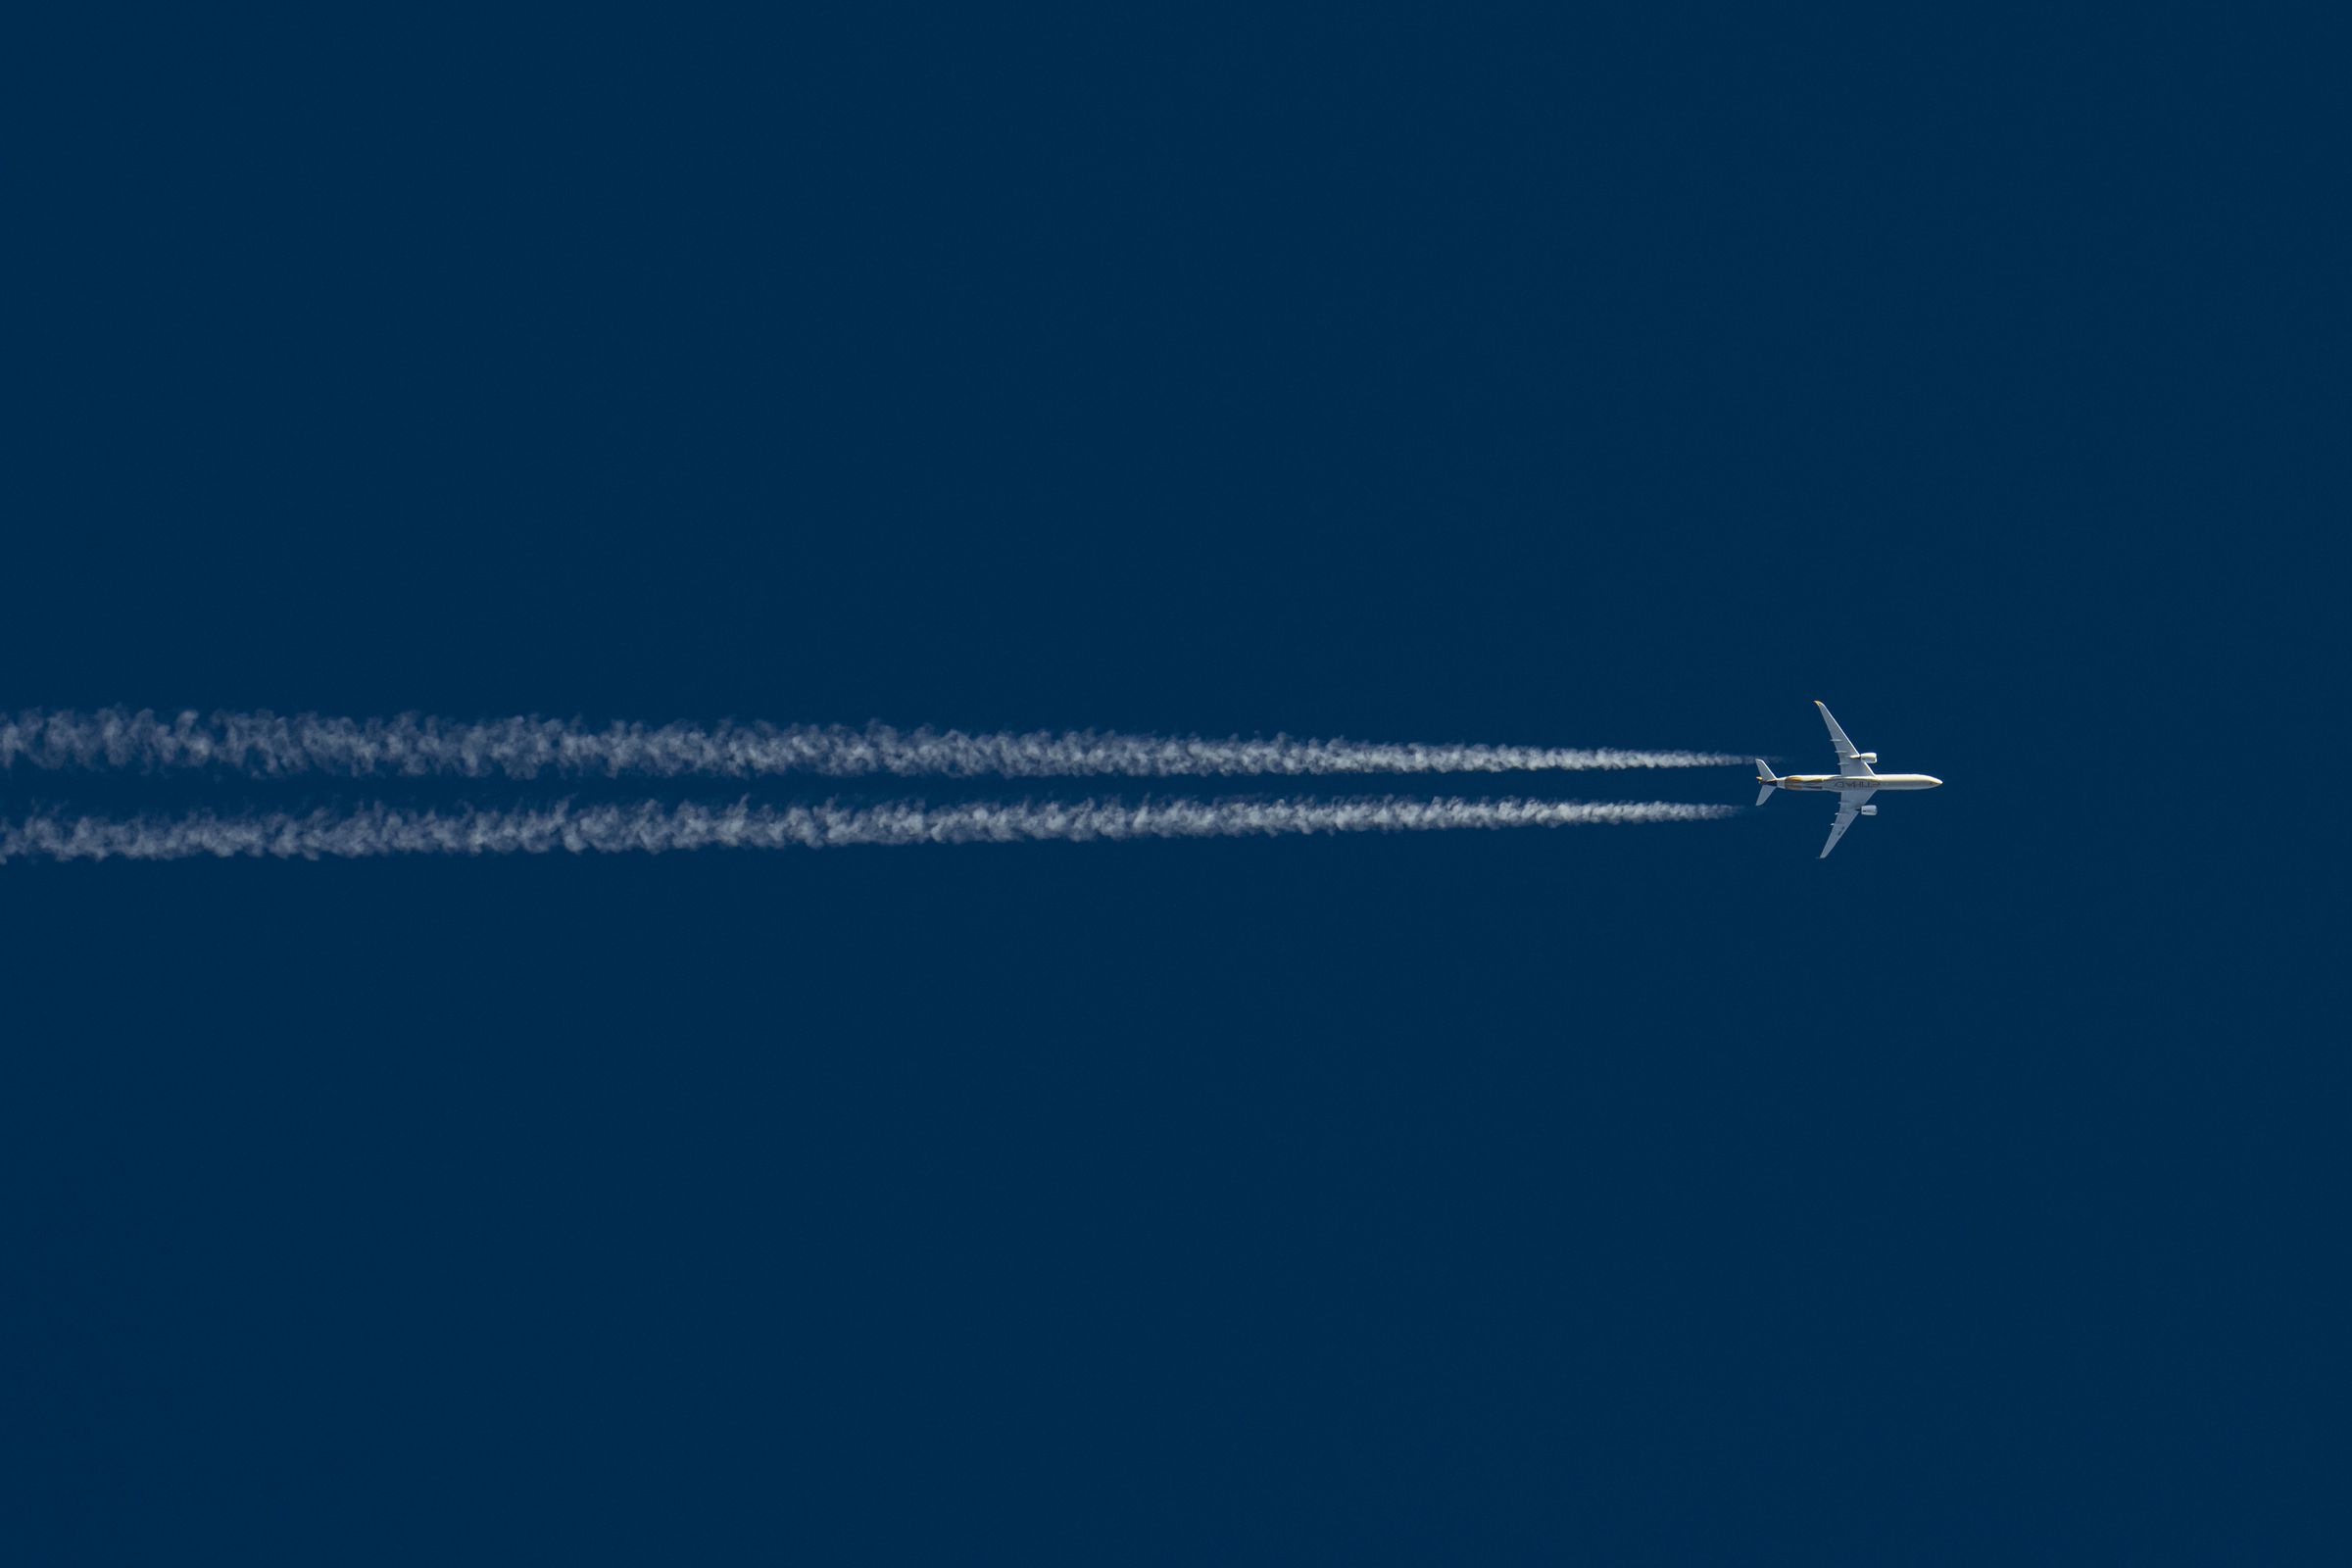 A plane flying across a blue sky with contrails behind it.